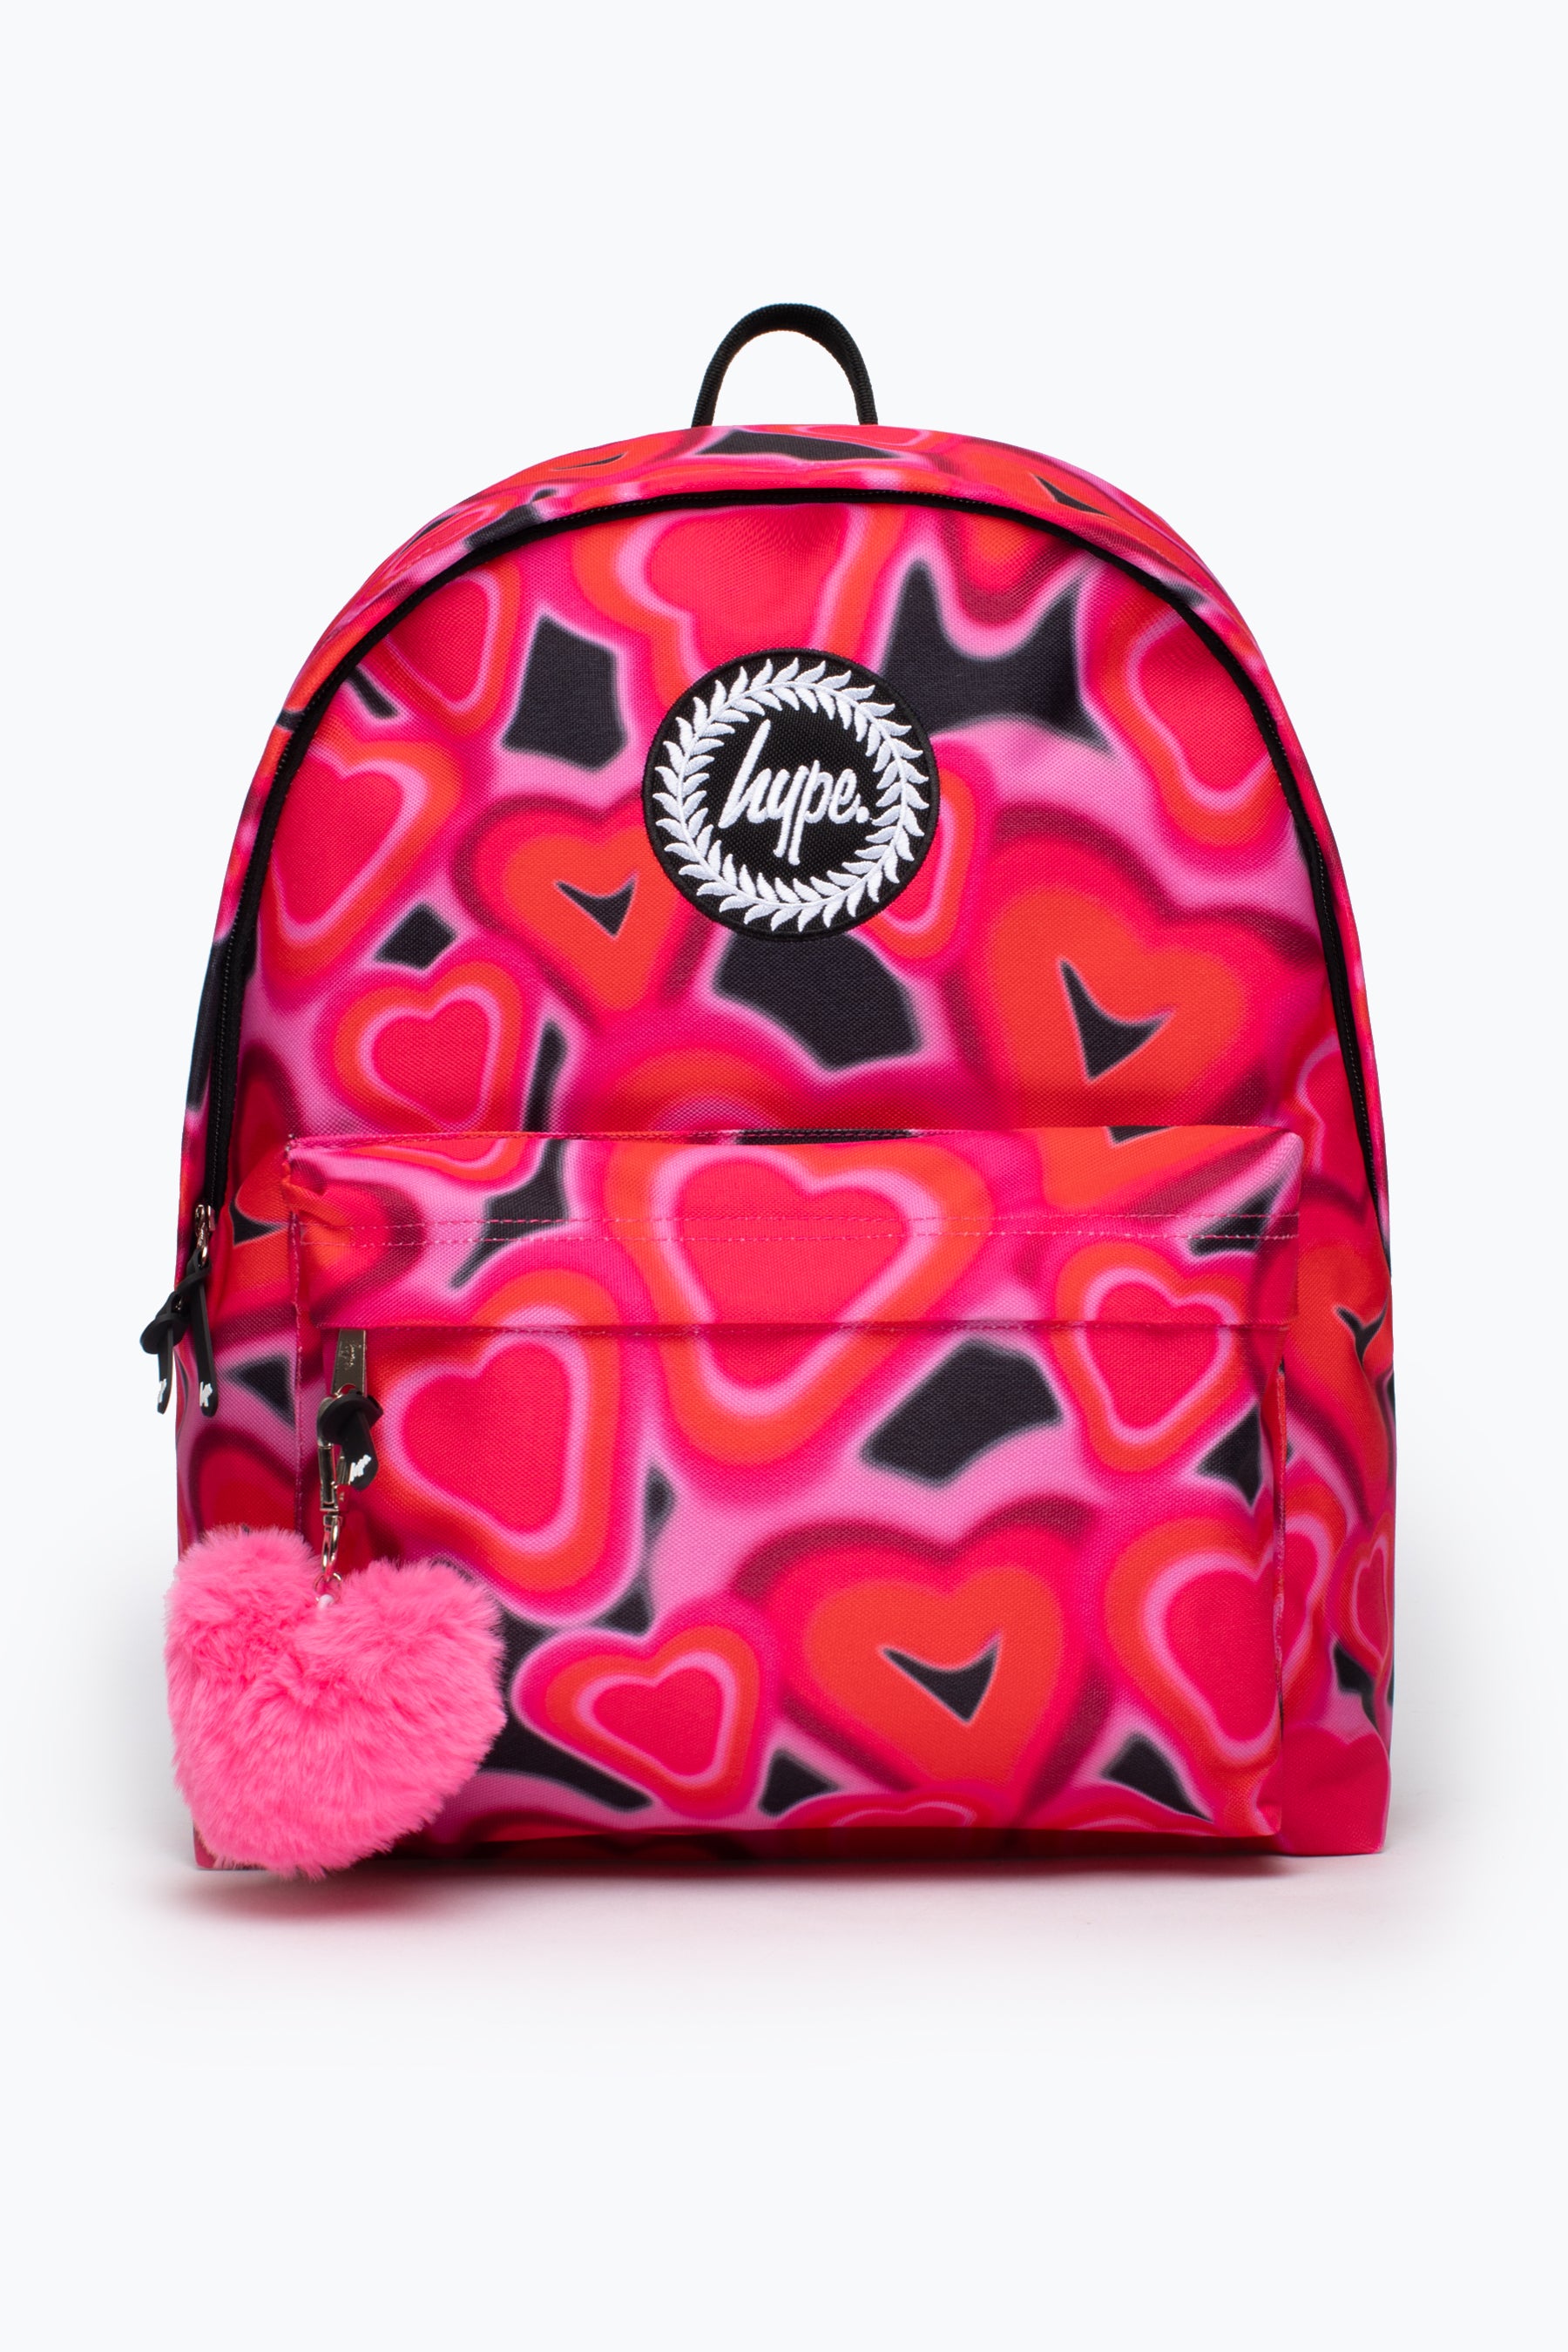 HYPE KIDS UNISEX PINK SPRAY HEARTS BACKPACK | Hype.